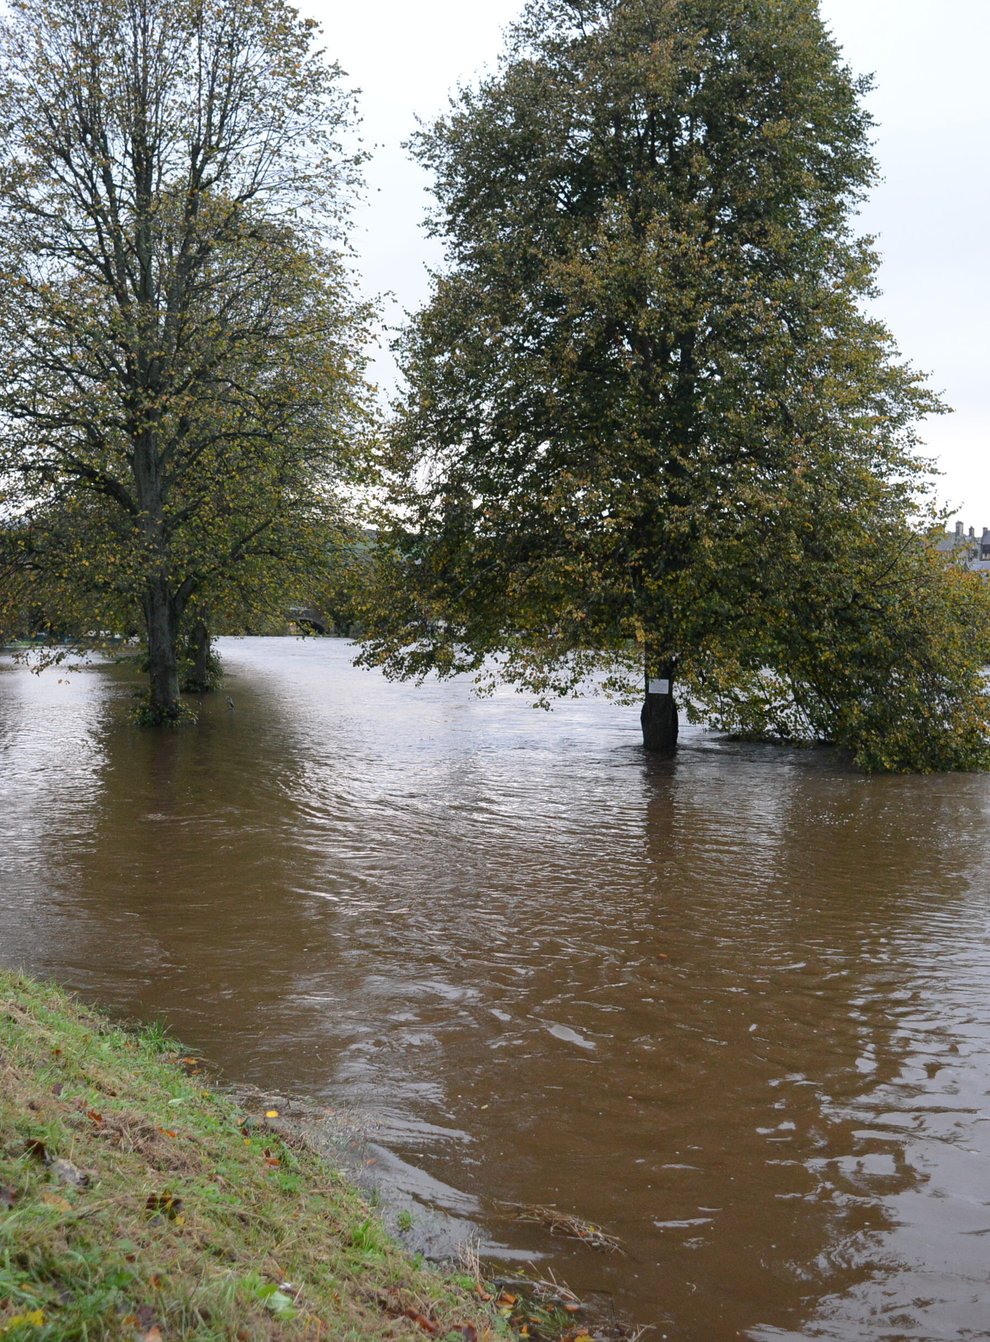 Flooding in Peebles in the Scottish Borders where the River Tweed has burst its banks (Mark Davey/PA)